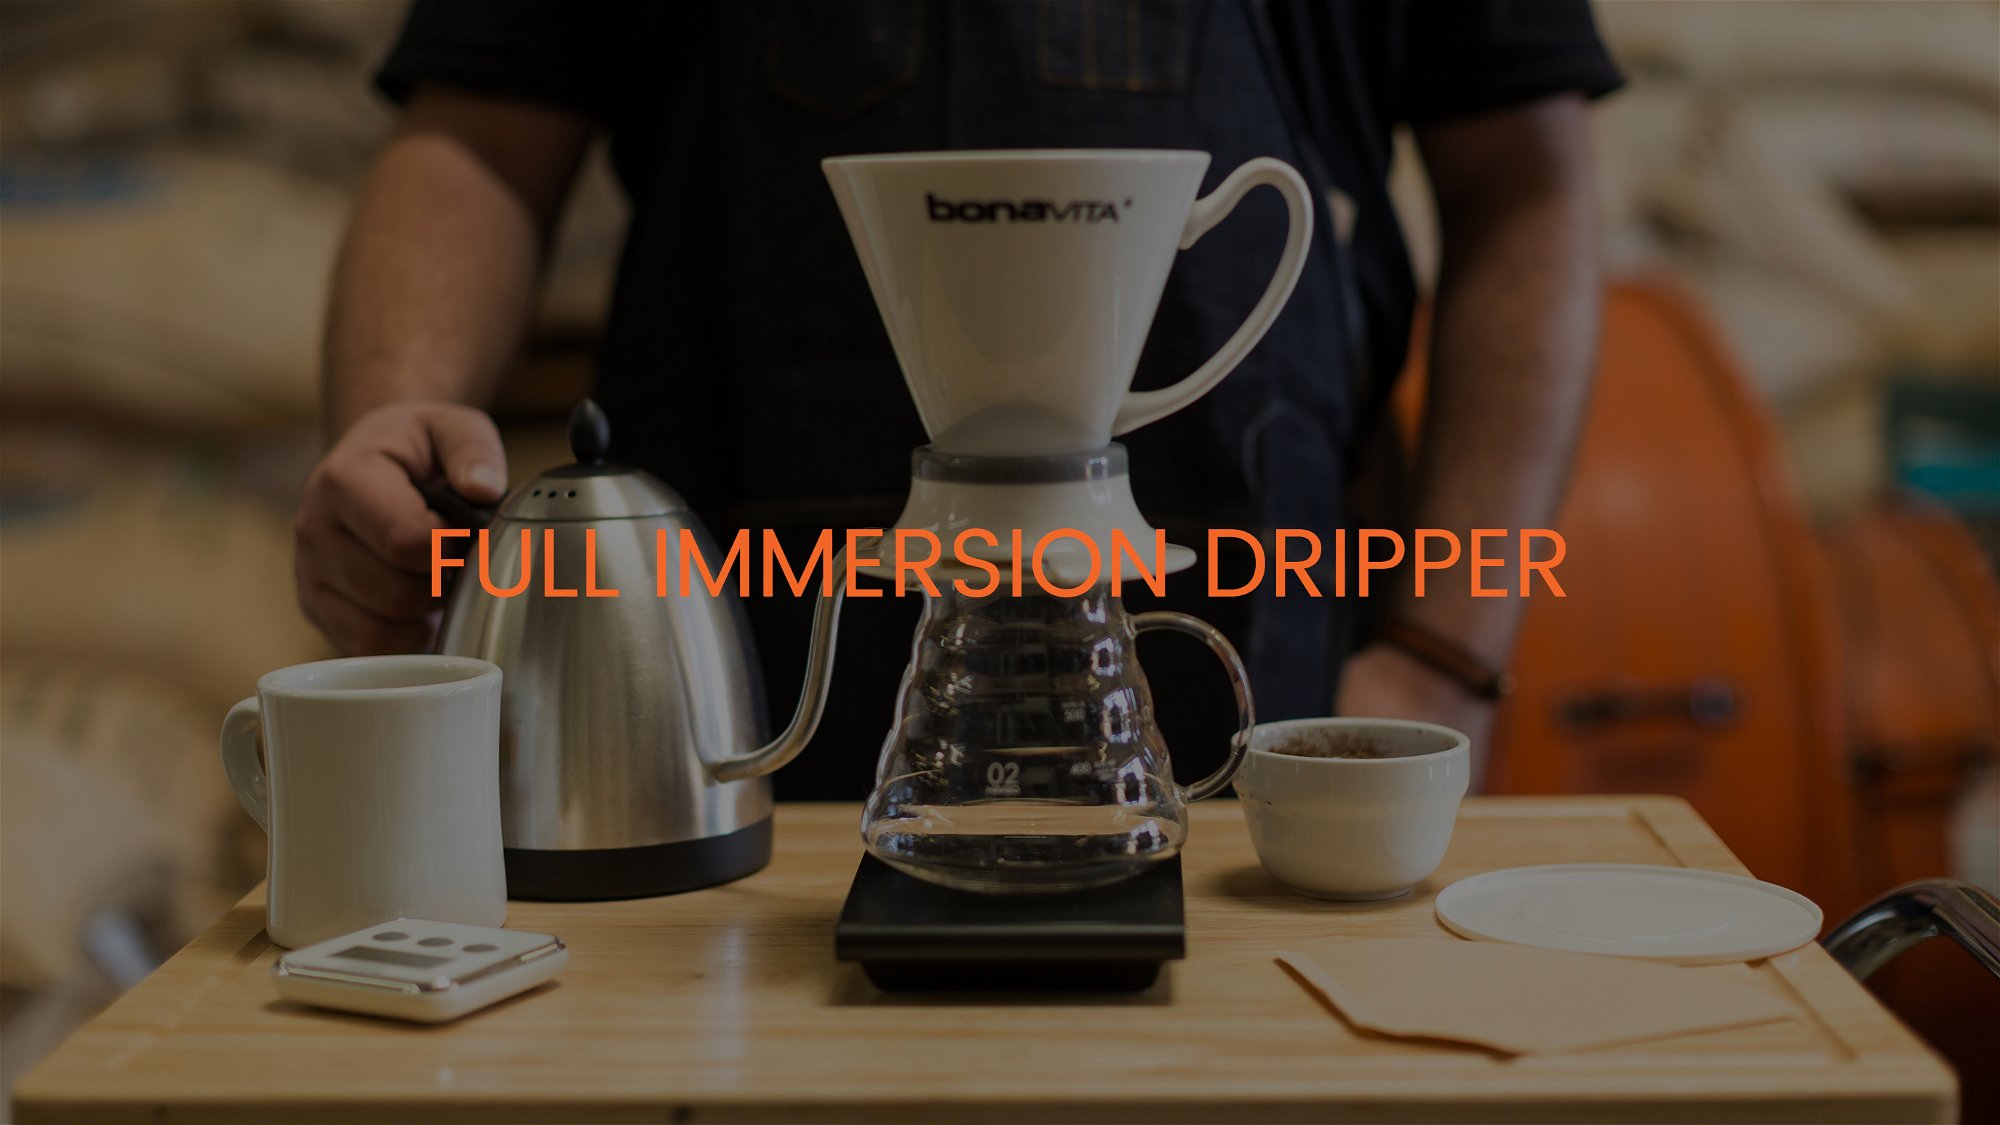 Full immersion dripper on scale with mug and kettle. Titled "Full Immersion Dripper"